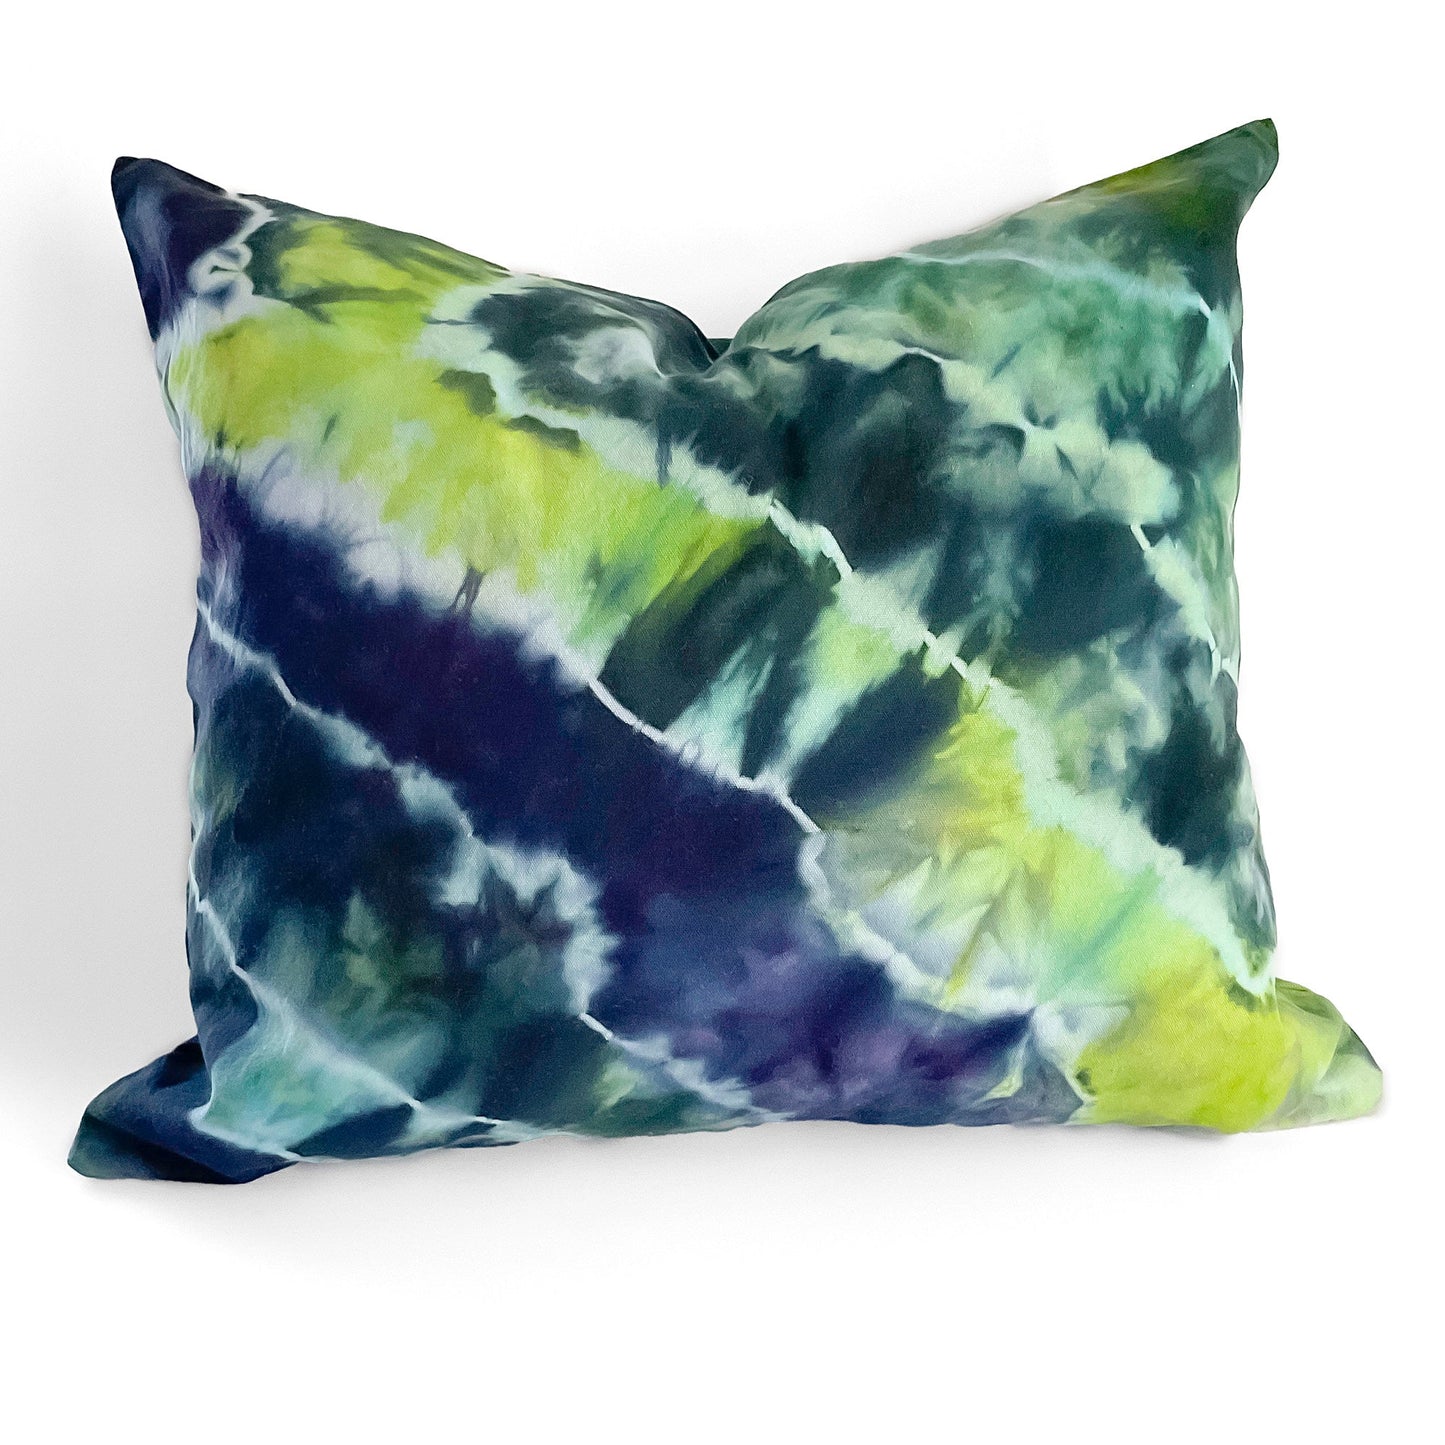 Tie Dyed Pillow Cover in Blues and Greens - Sherri O Designs